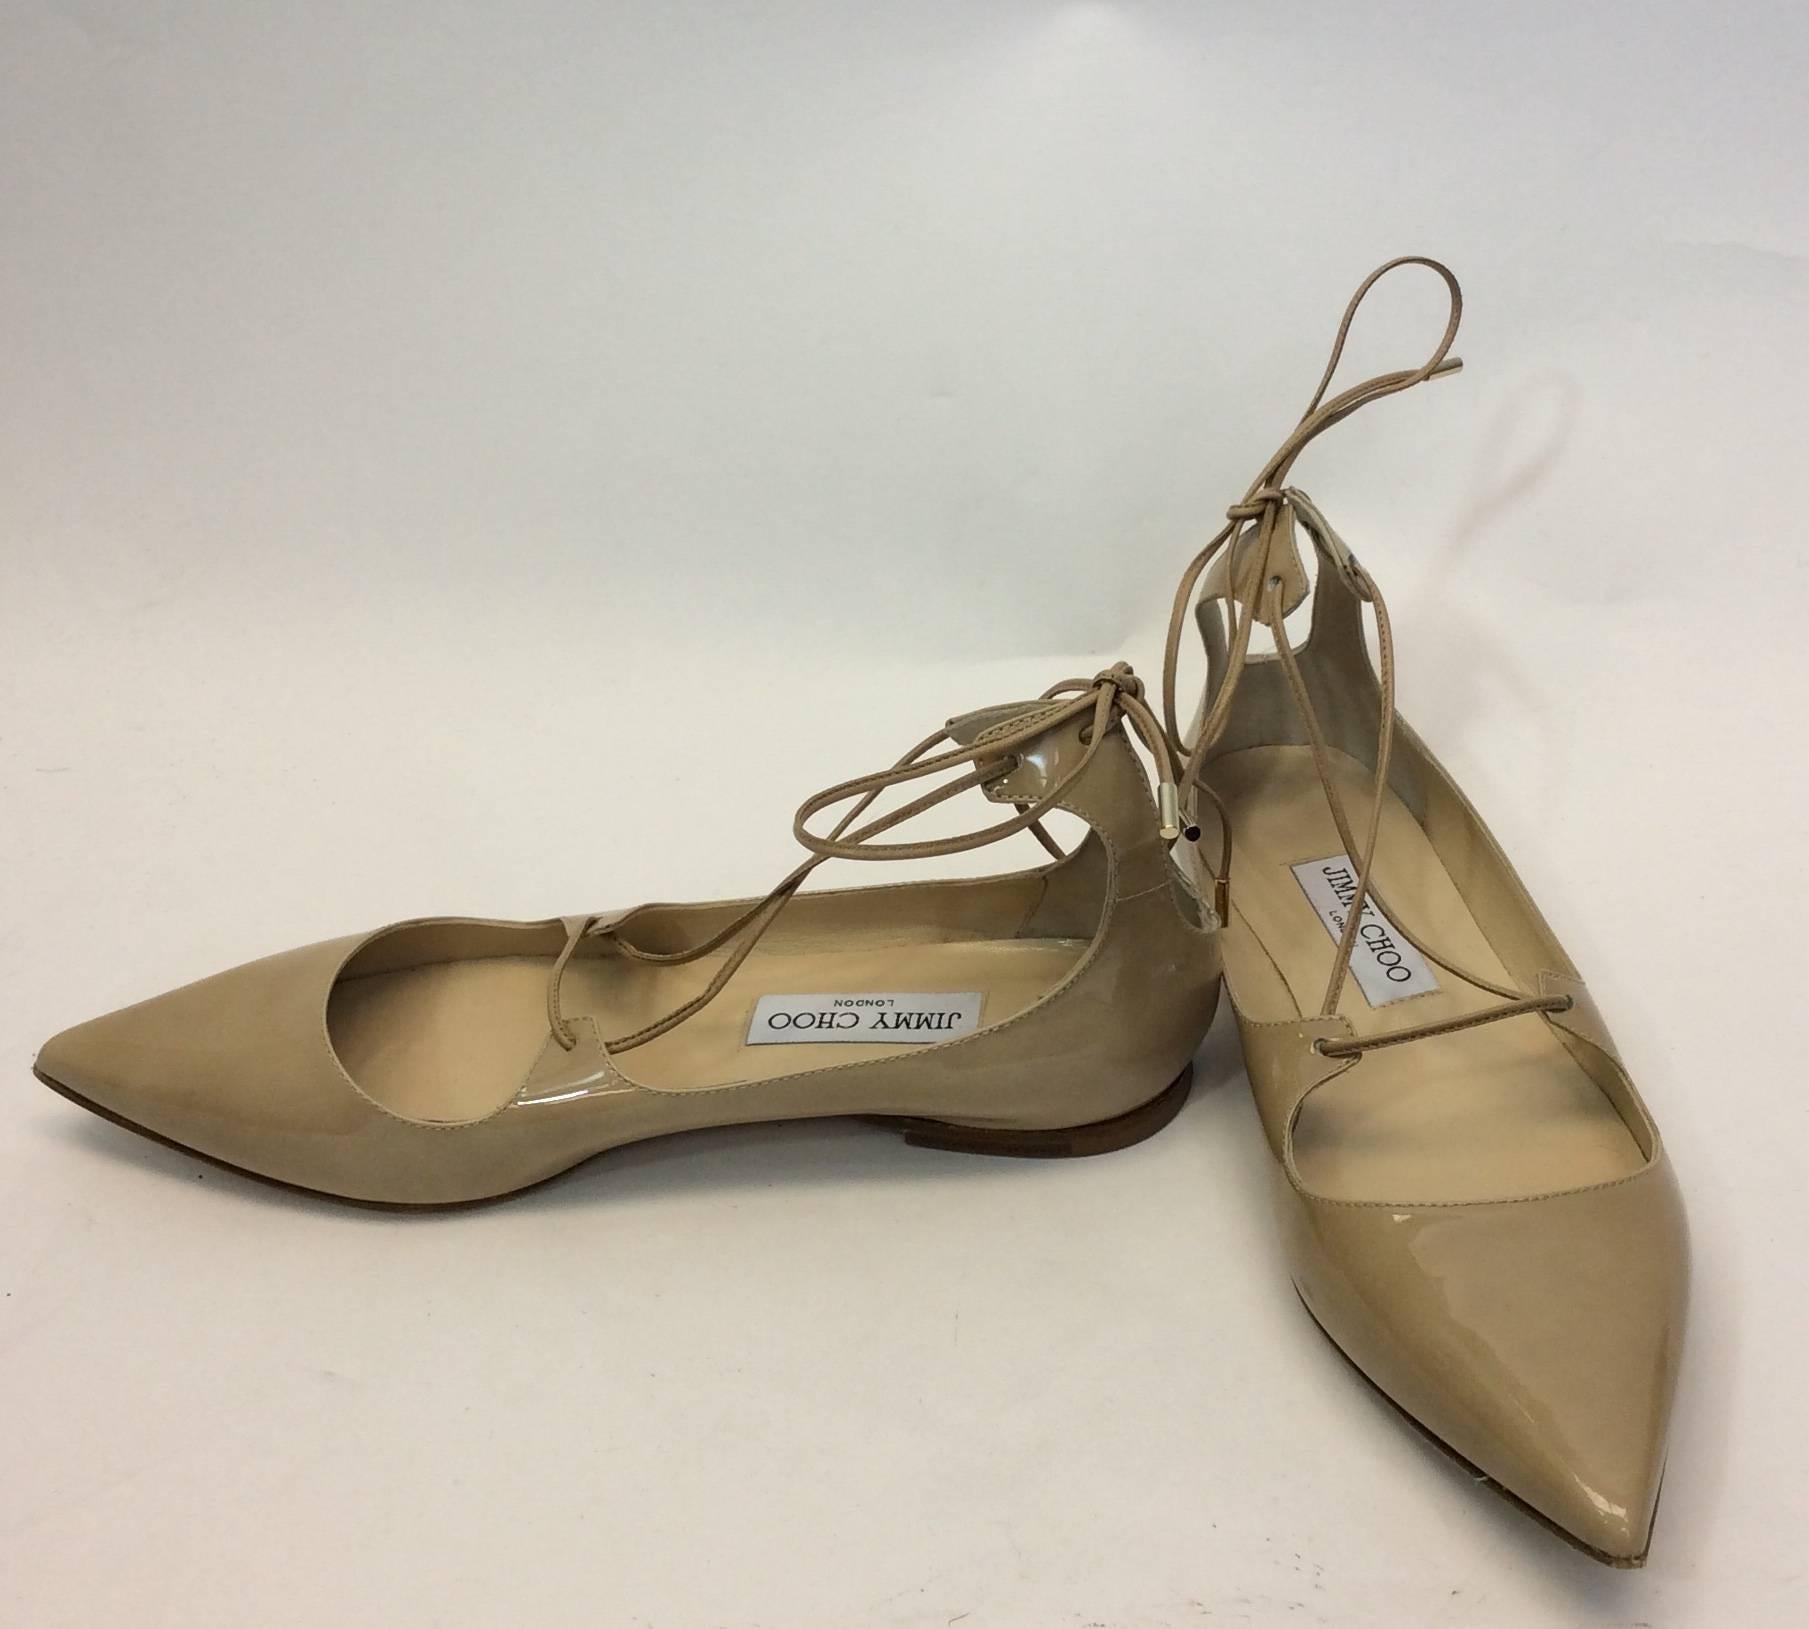 Tan Patent Lace Up Flats
3.5 inch sole width
Patent ties behind heel
Size 38.5 (Equates to US 8)
Leather and wood sole, :leather upper and lining